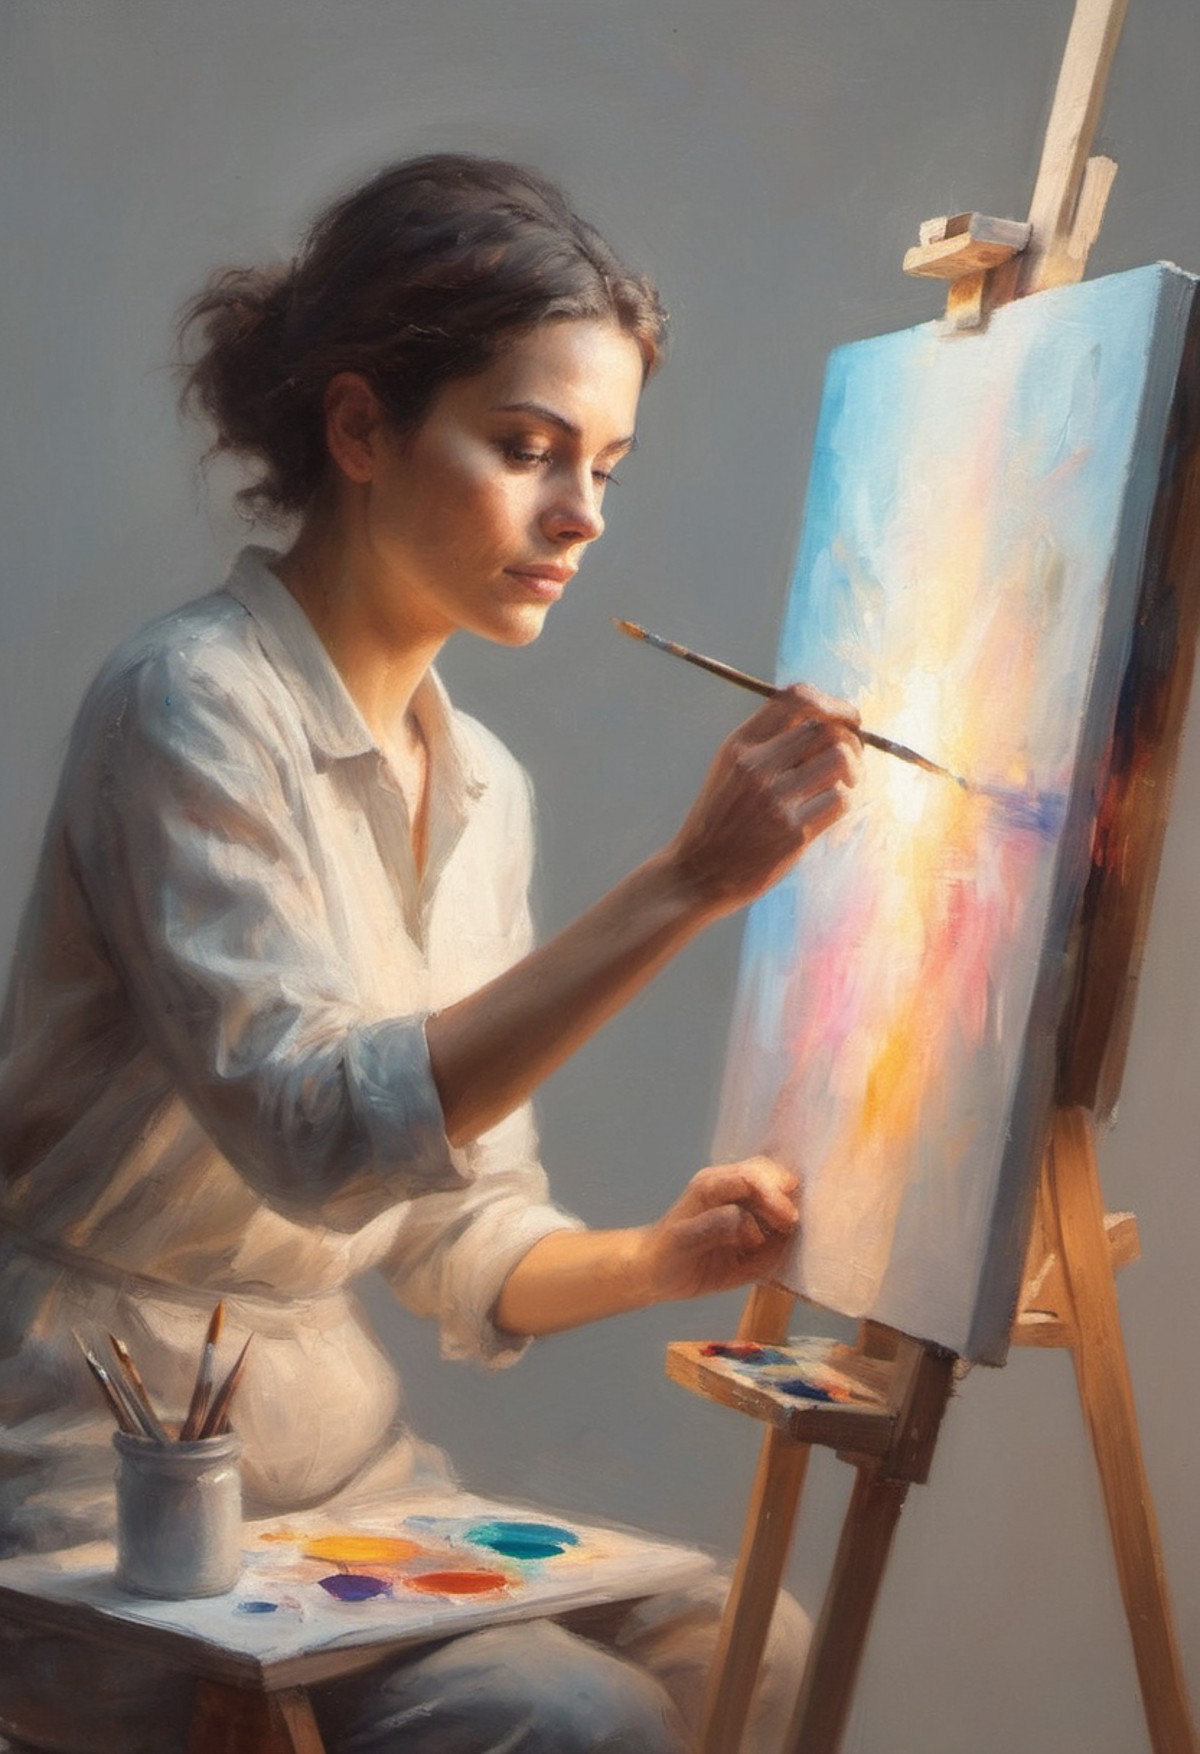 minimalist closeup portrait of an artist at work painting on her canvas easel magical worlds glowing magical energies doub...